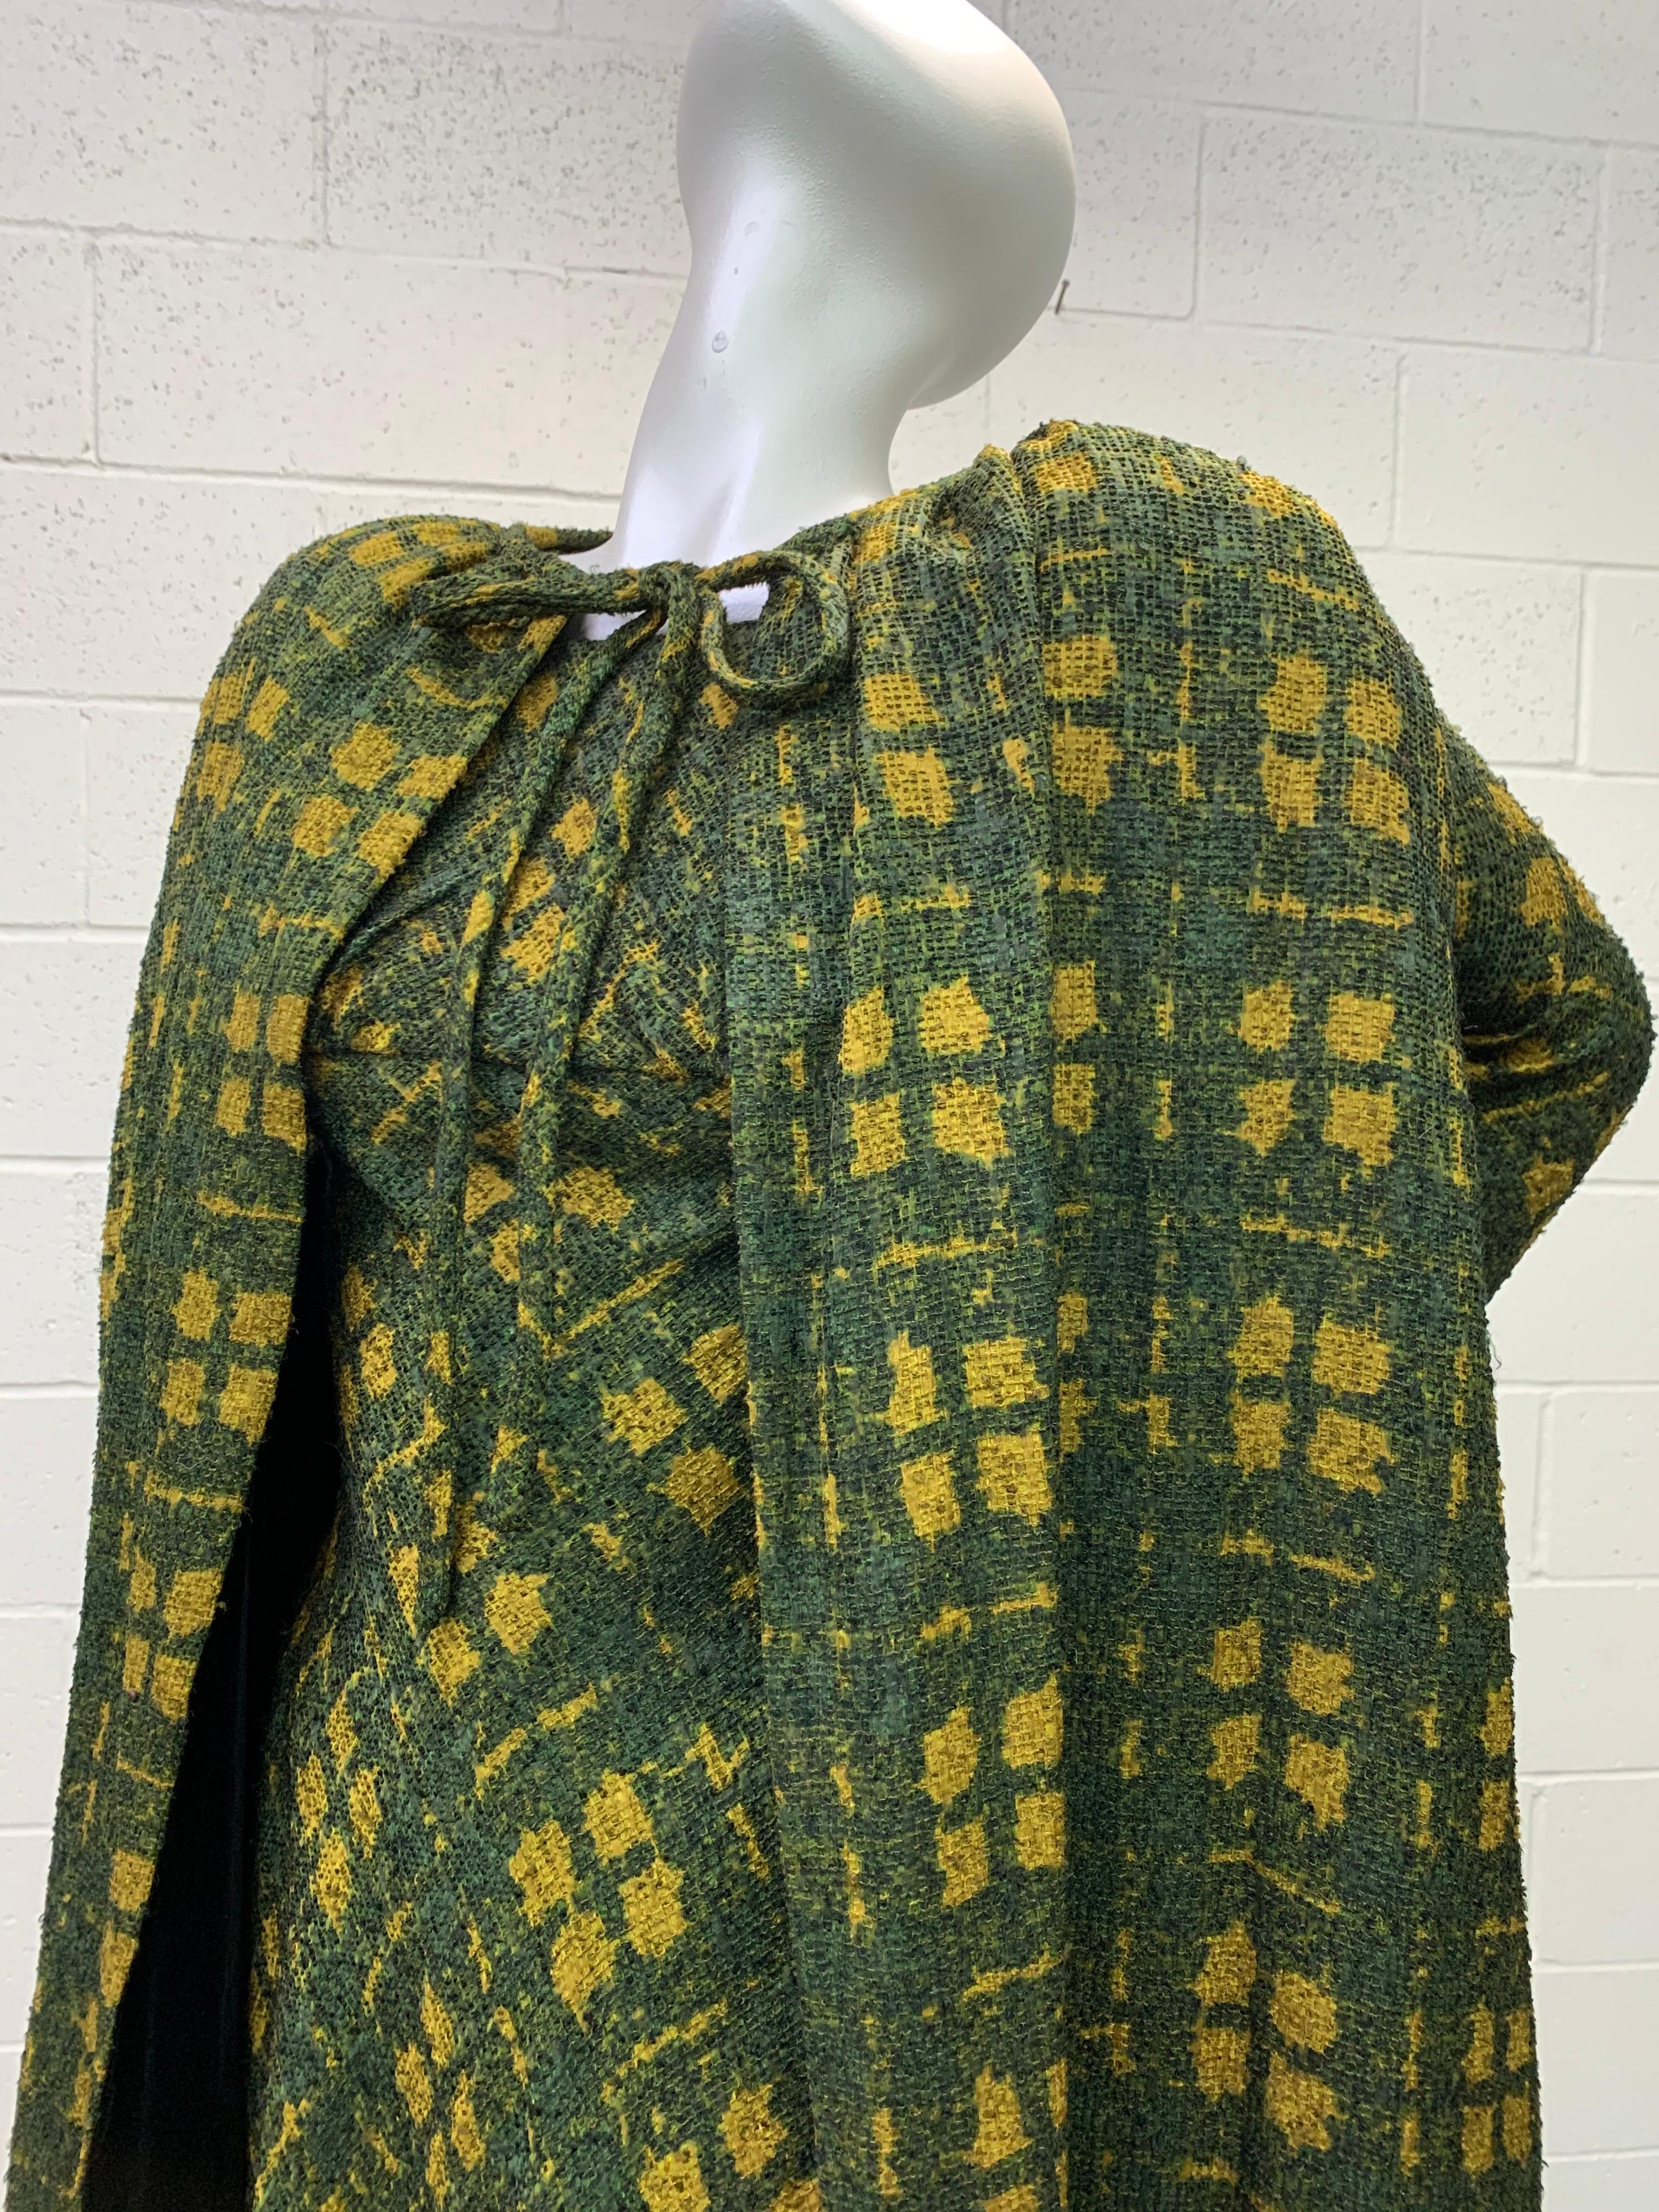 1950 Galanos Olive & Mustard Color Fine Wool Boucle Dress & Cape Ensemble In Excellent Condition For Sale In Gresham, OR